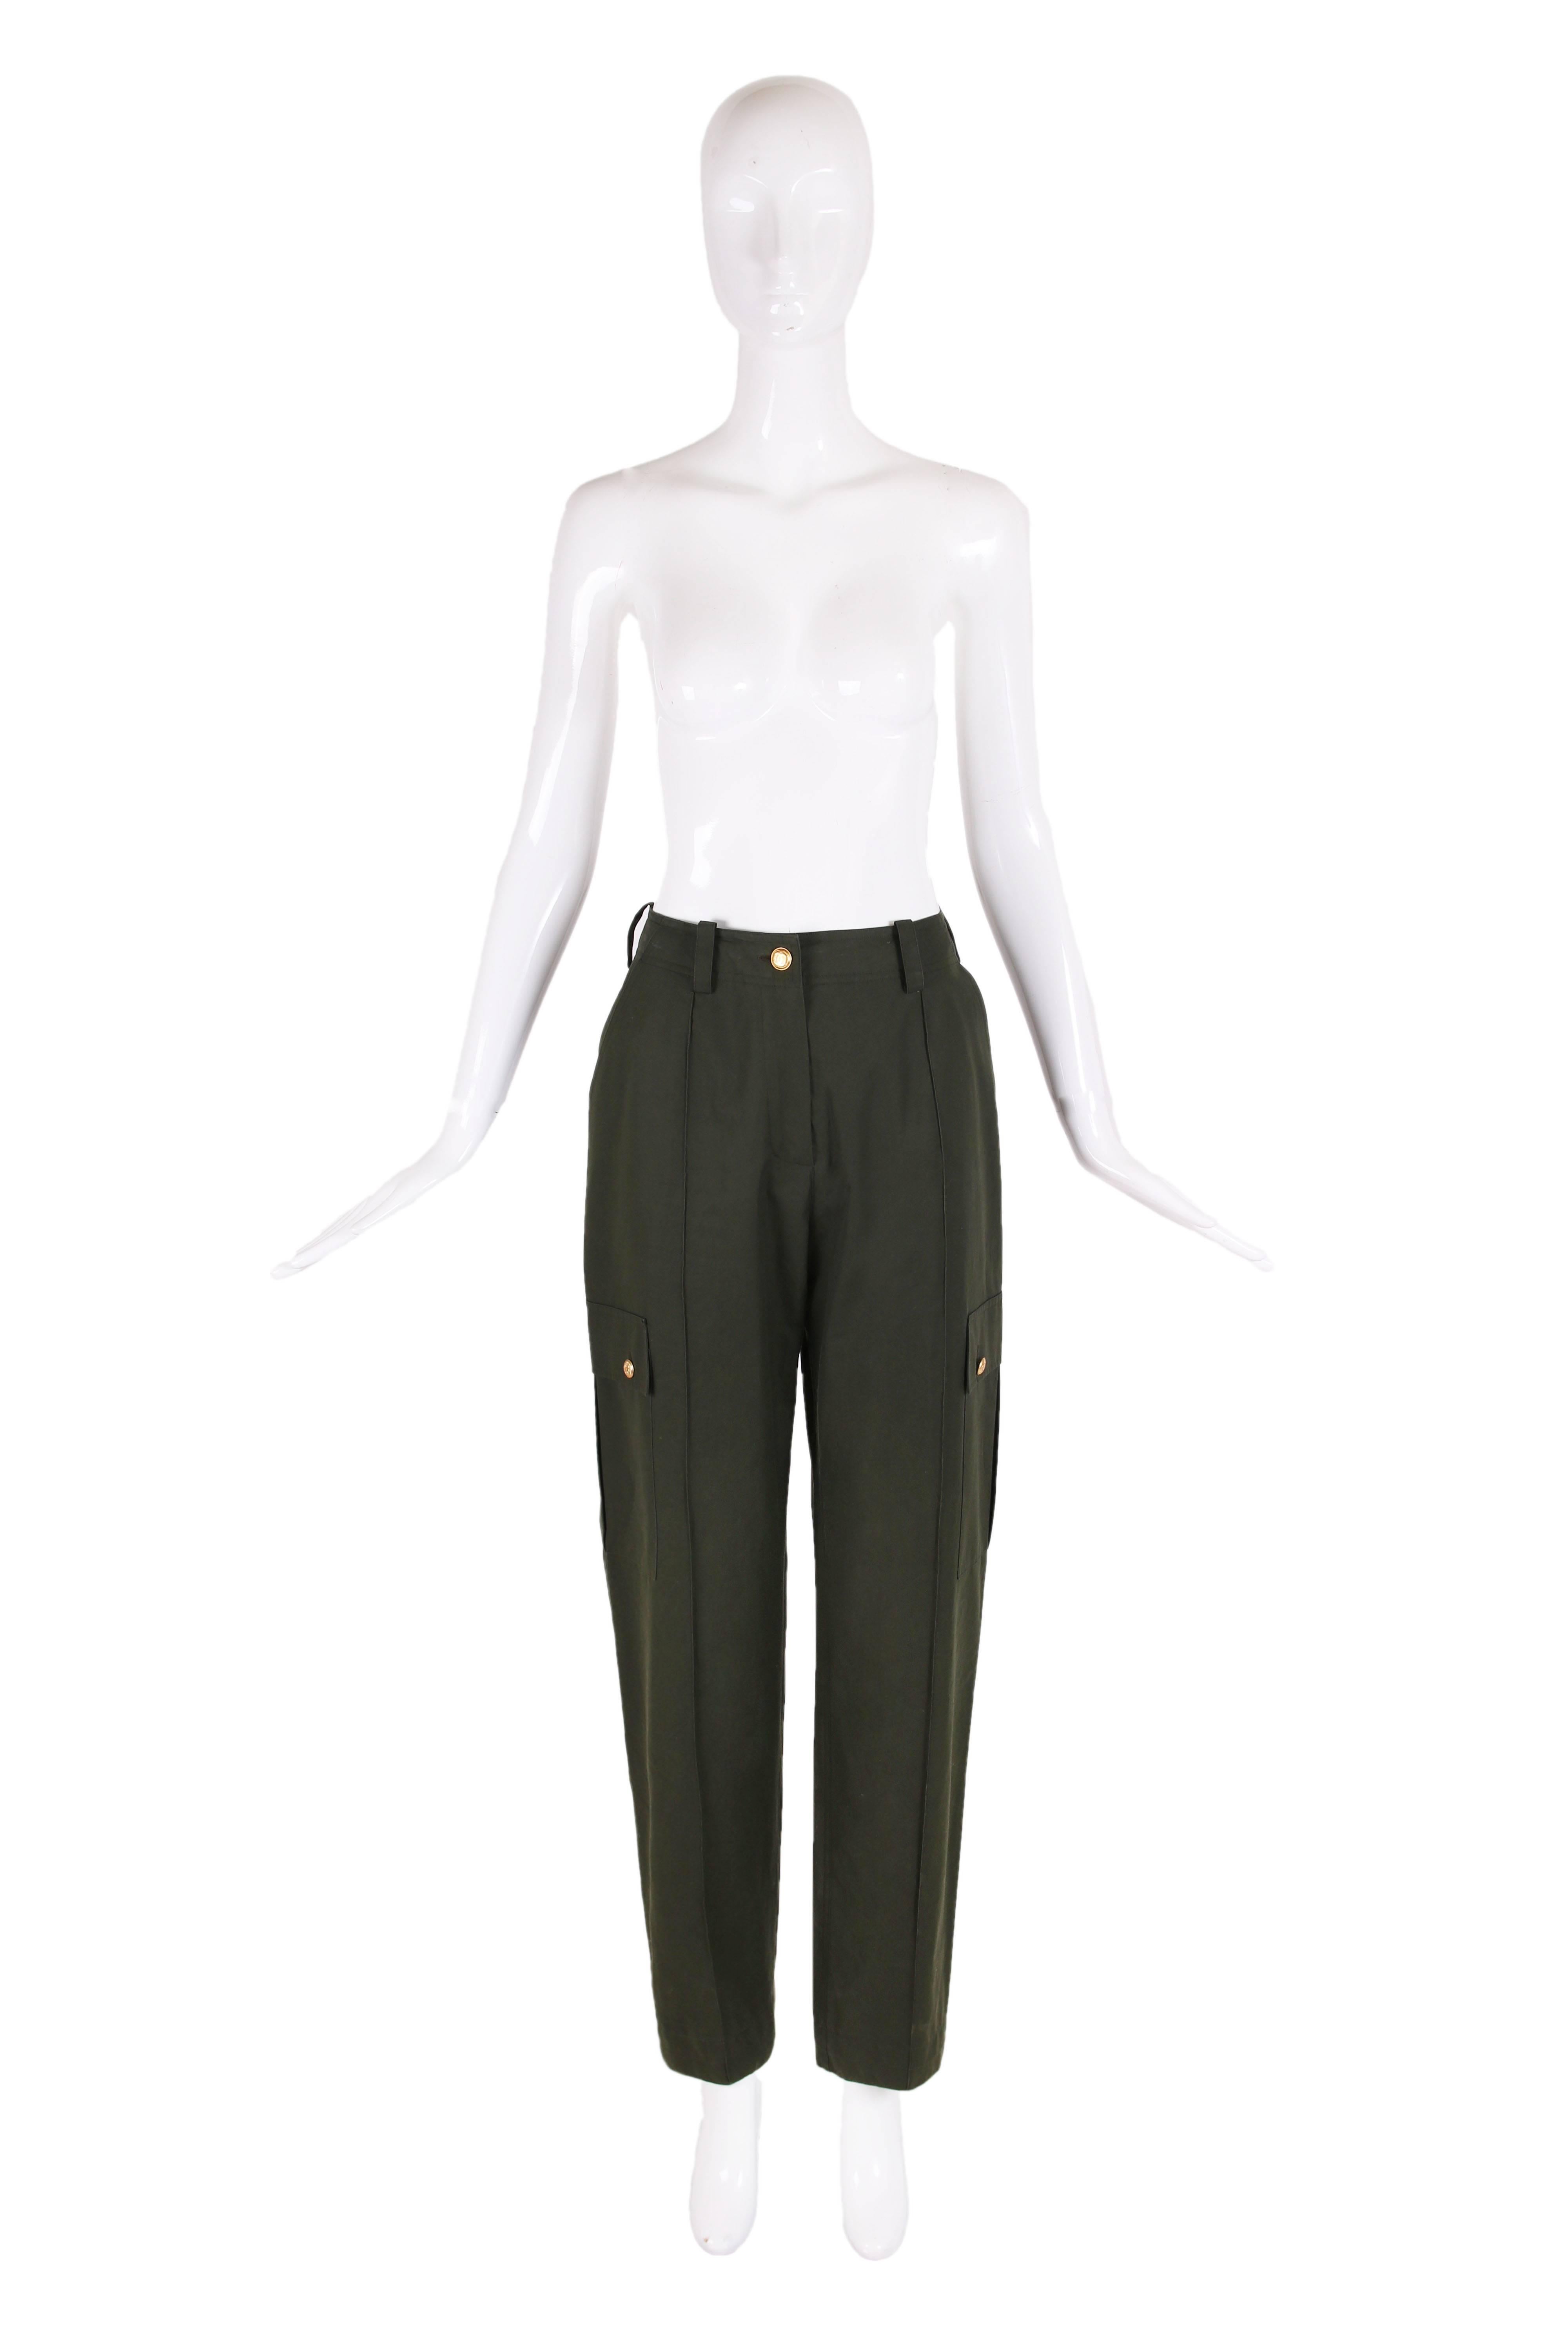 Vintage Chanel olive green high-waisted cotton cargo pants featuring belt loops,  two side pockets, and two cargo pockets with two gold-toned CC logo buttons on each cargo pocket. In excellent condition. Size EU 40. 
Waist - 28"
Hip -